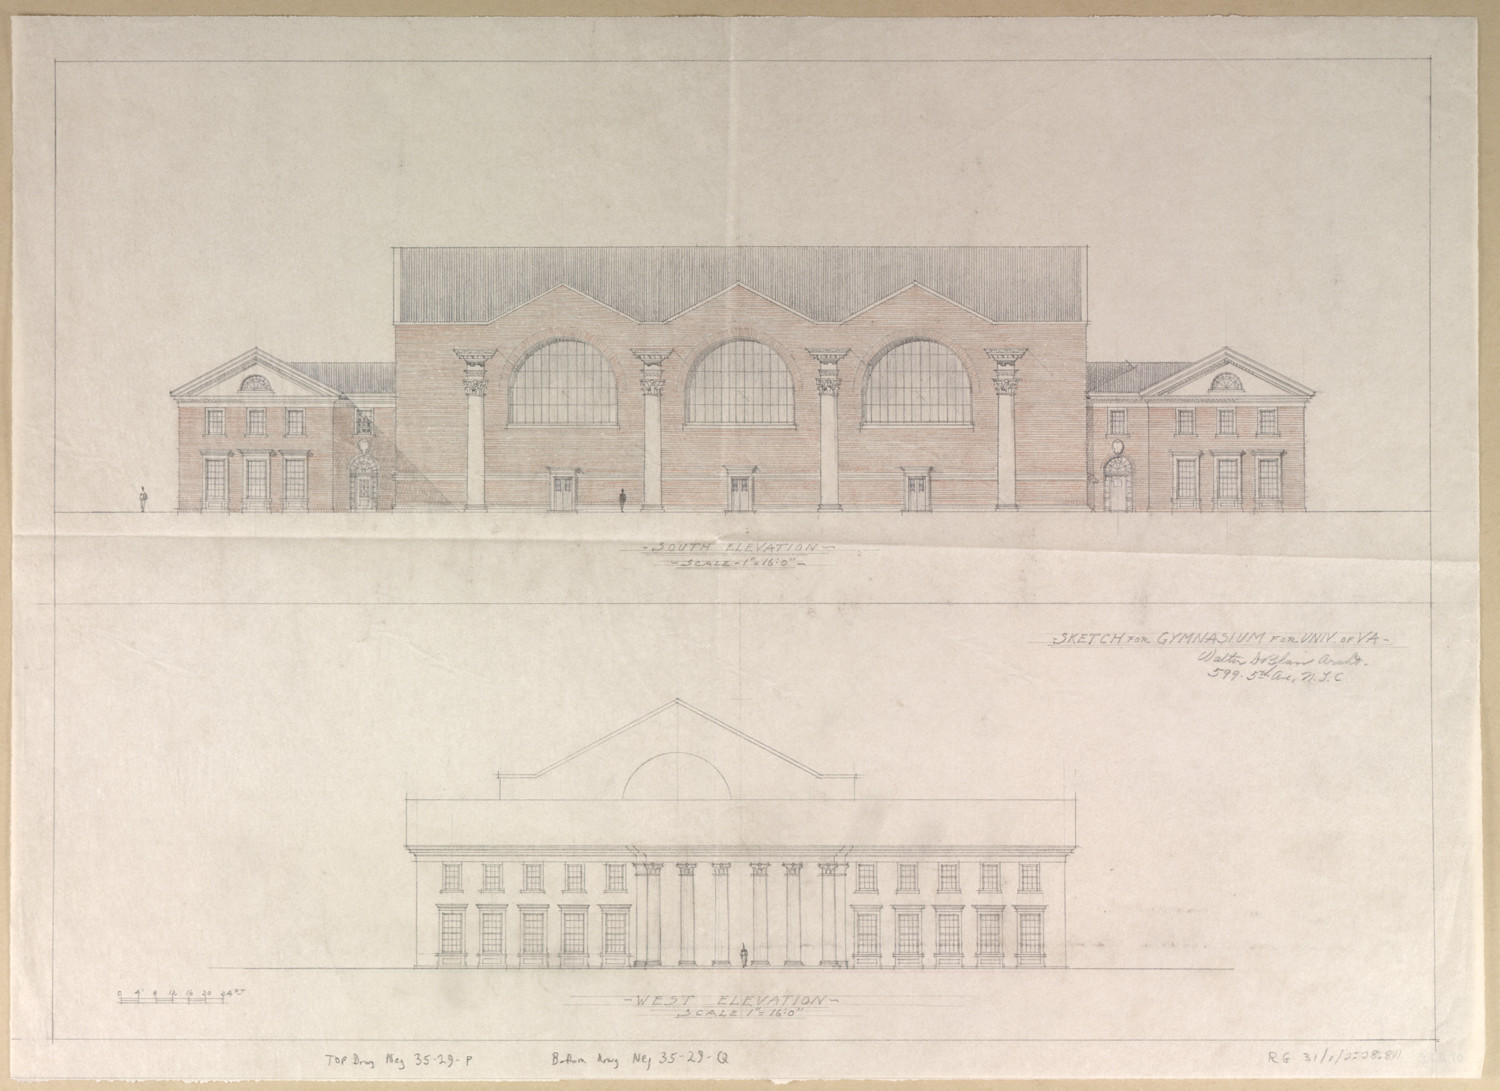  This version of Memorial Gymnasium was similar in design to the one actually built, though the actual version includes five peaked bays instead of the three pictured here. (Source: Albert and Shirley Small Special Collections Library_